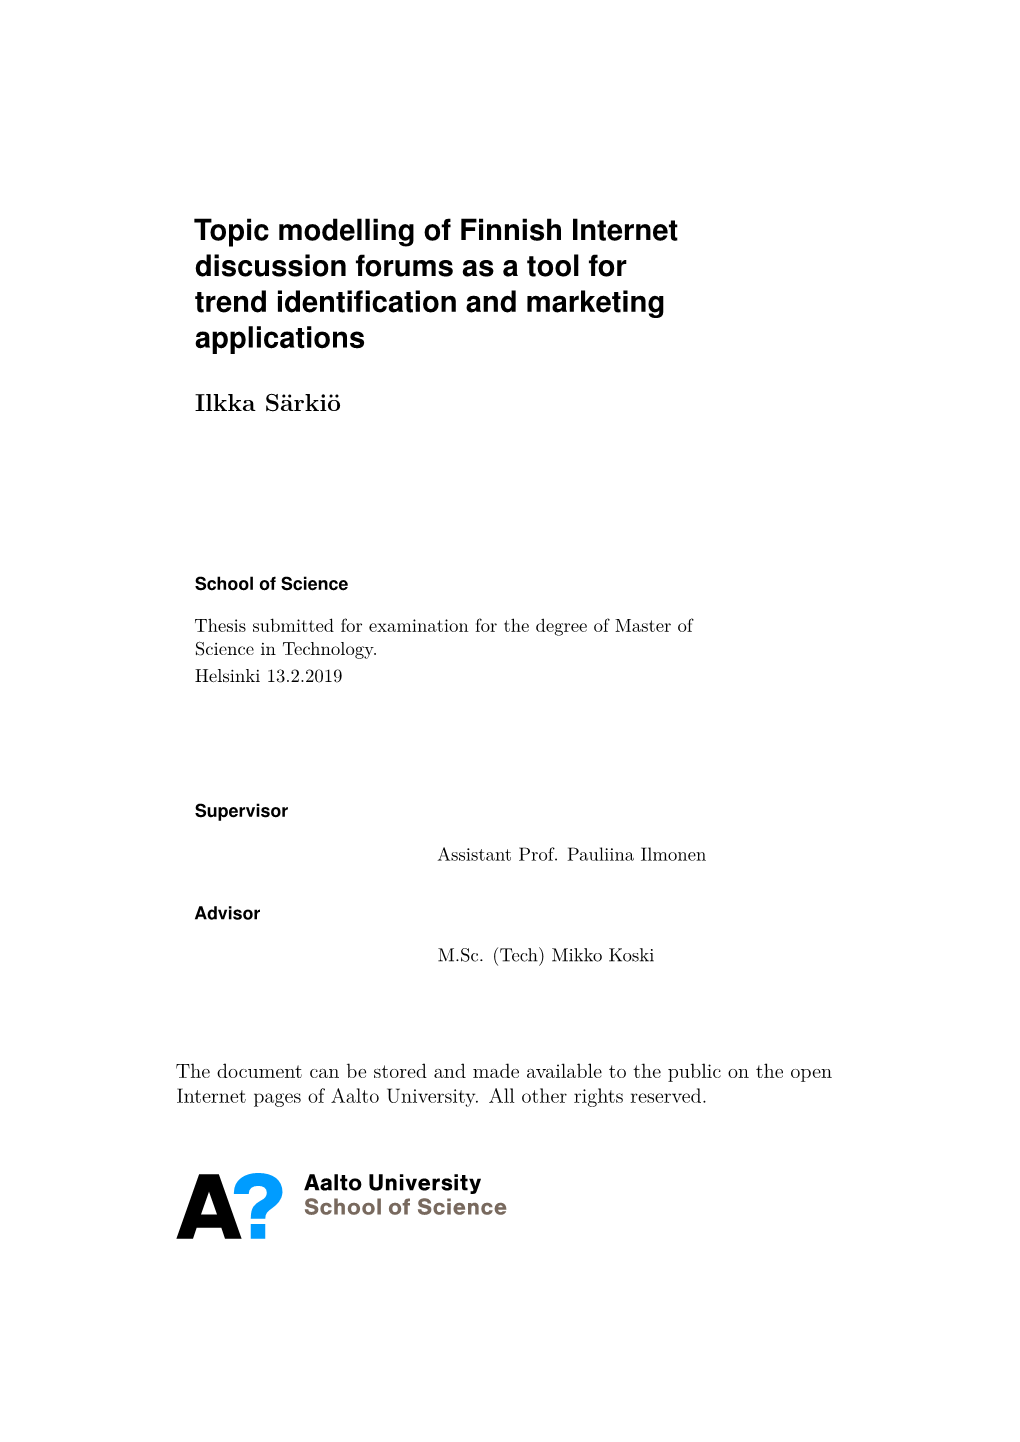 Topic Modelling of Finnish Internet Discussion Forums As a Tool for Trend Identification and Marketing Applications